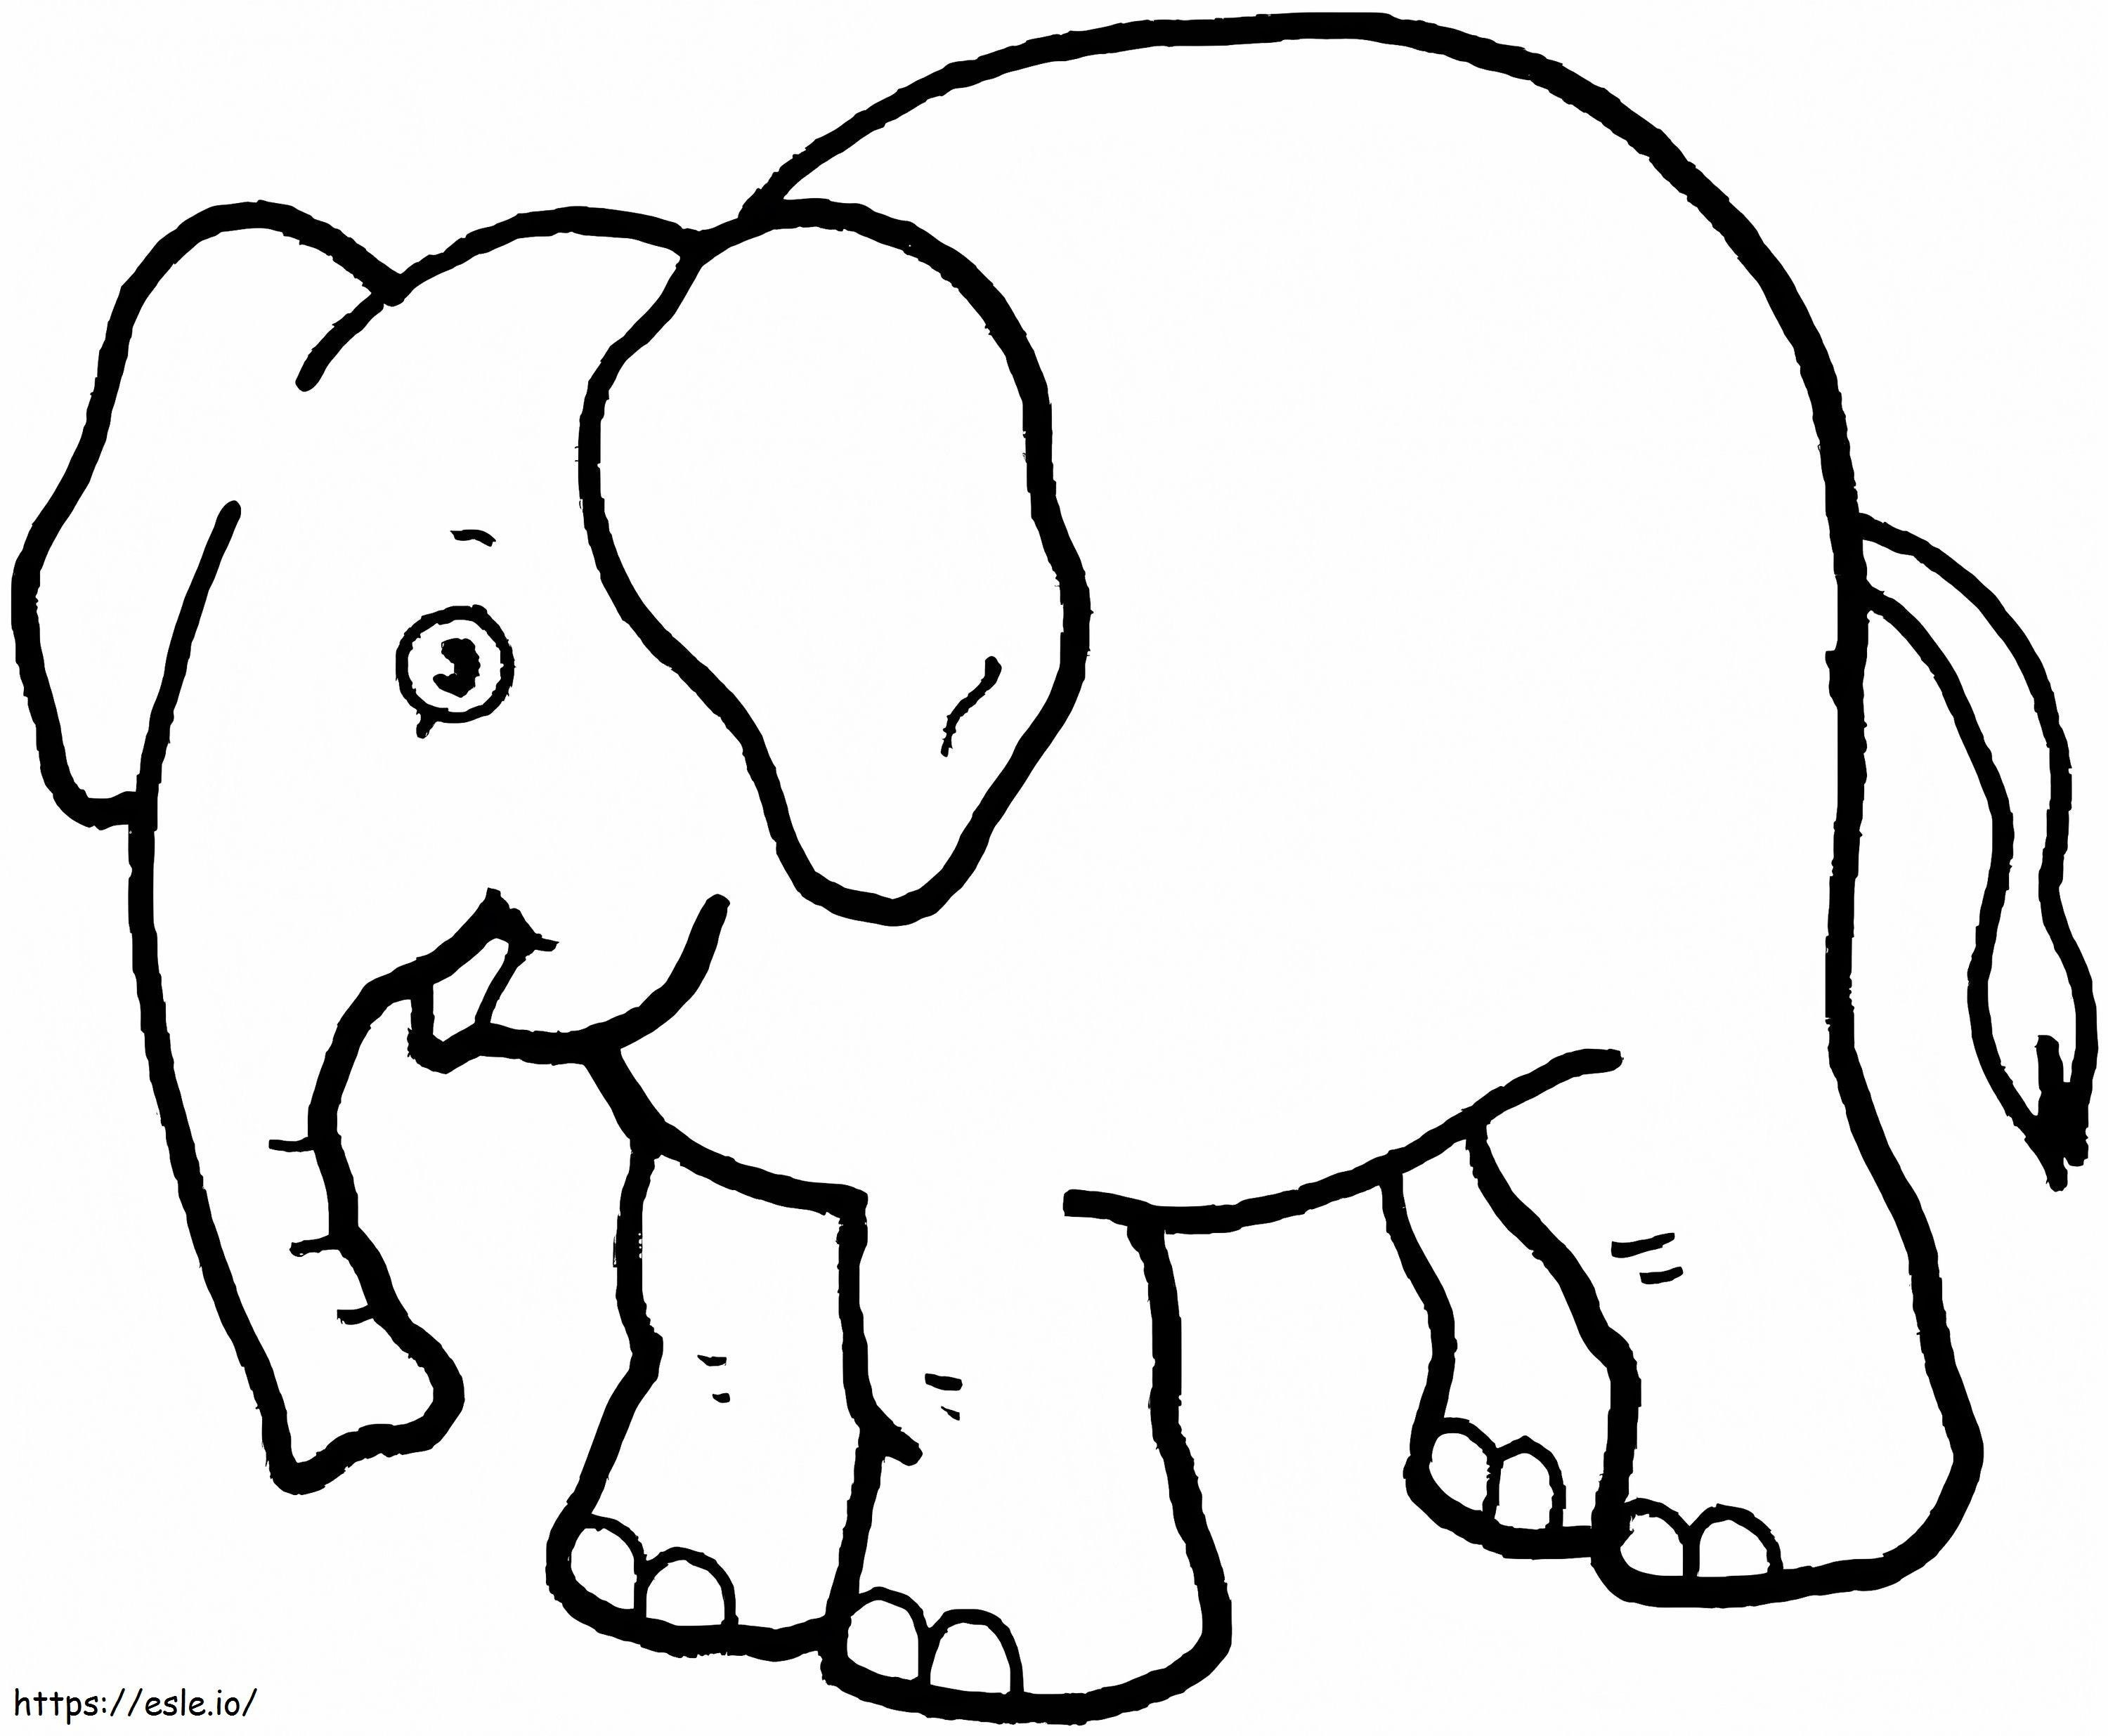 Funny Elephant coloring page